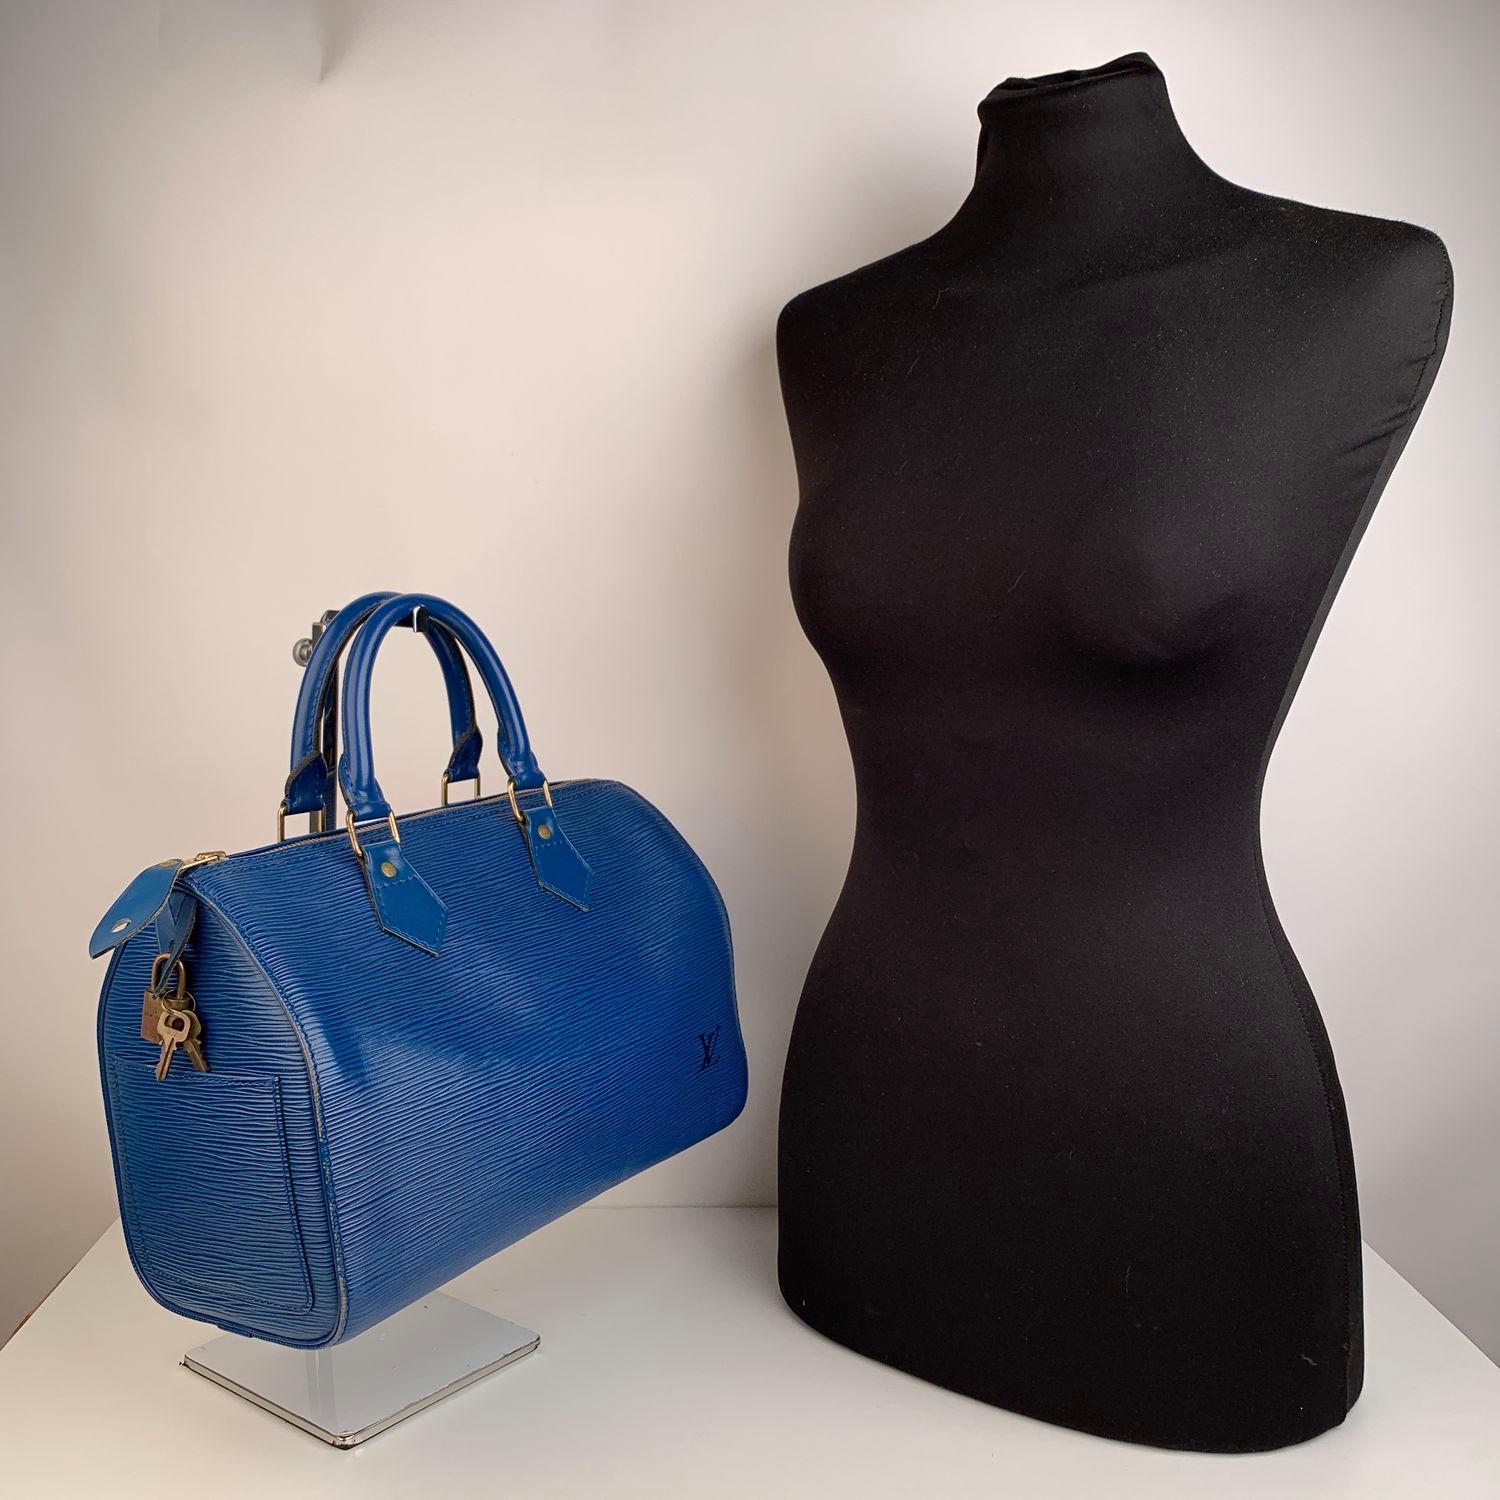 We offer Certificate of Authenticity provided by Entrupy for this item at no further cost.

Gorgeous Louis Vuitton Speedy in textured toledo blue epi leather. It has the classic Speedy 25 size and shape. The bag is accented with gold hardware and